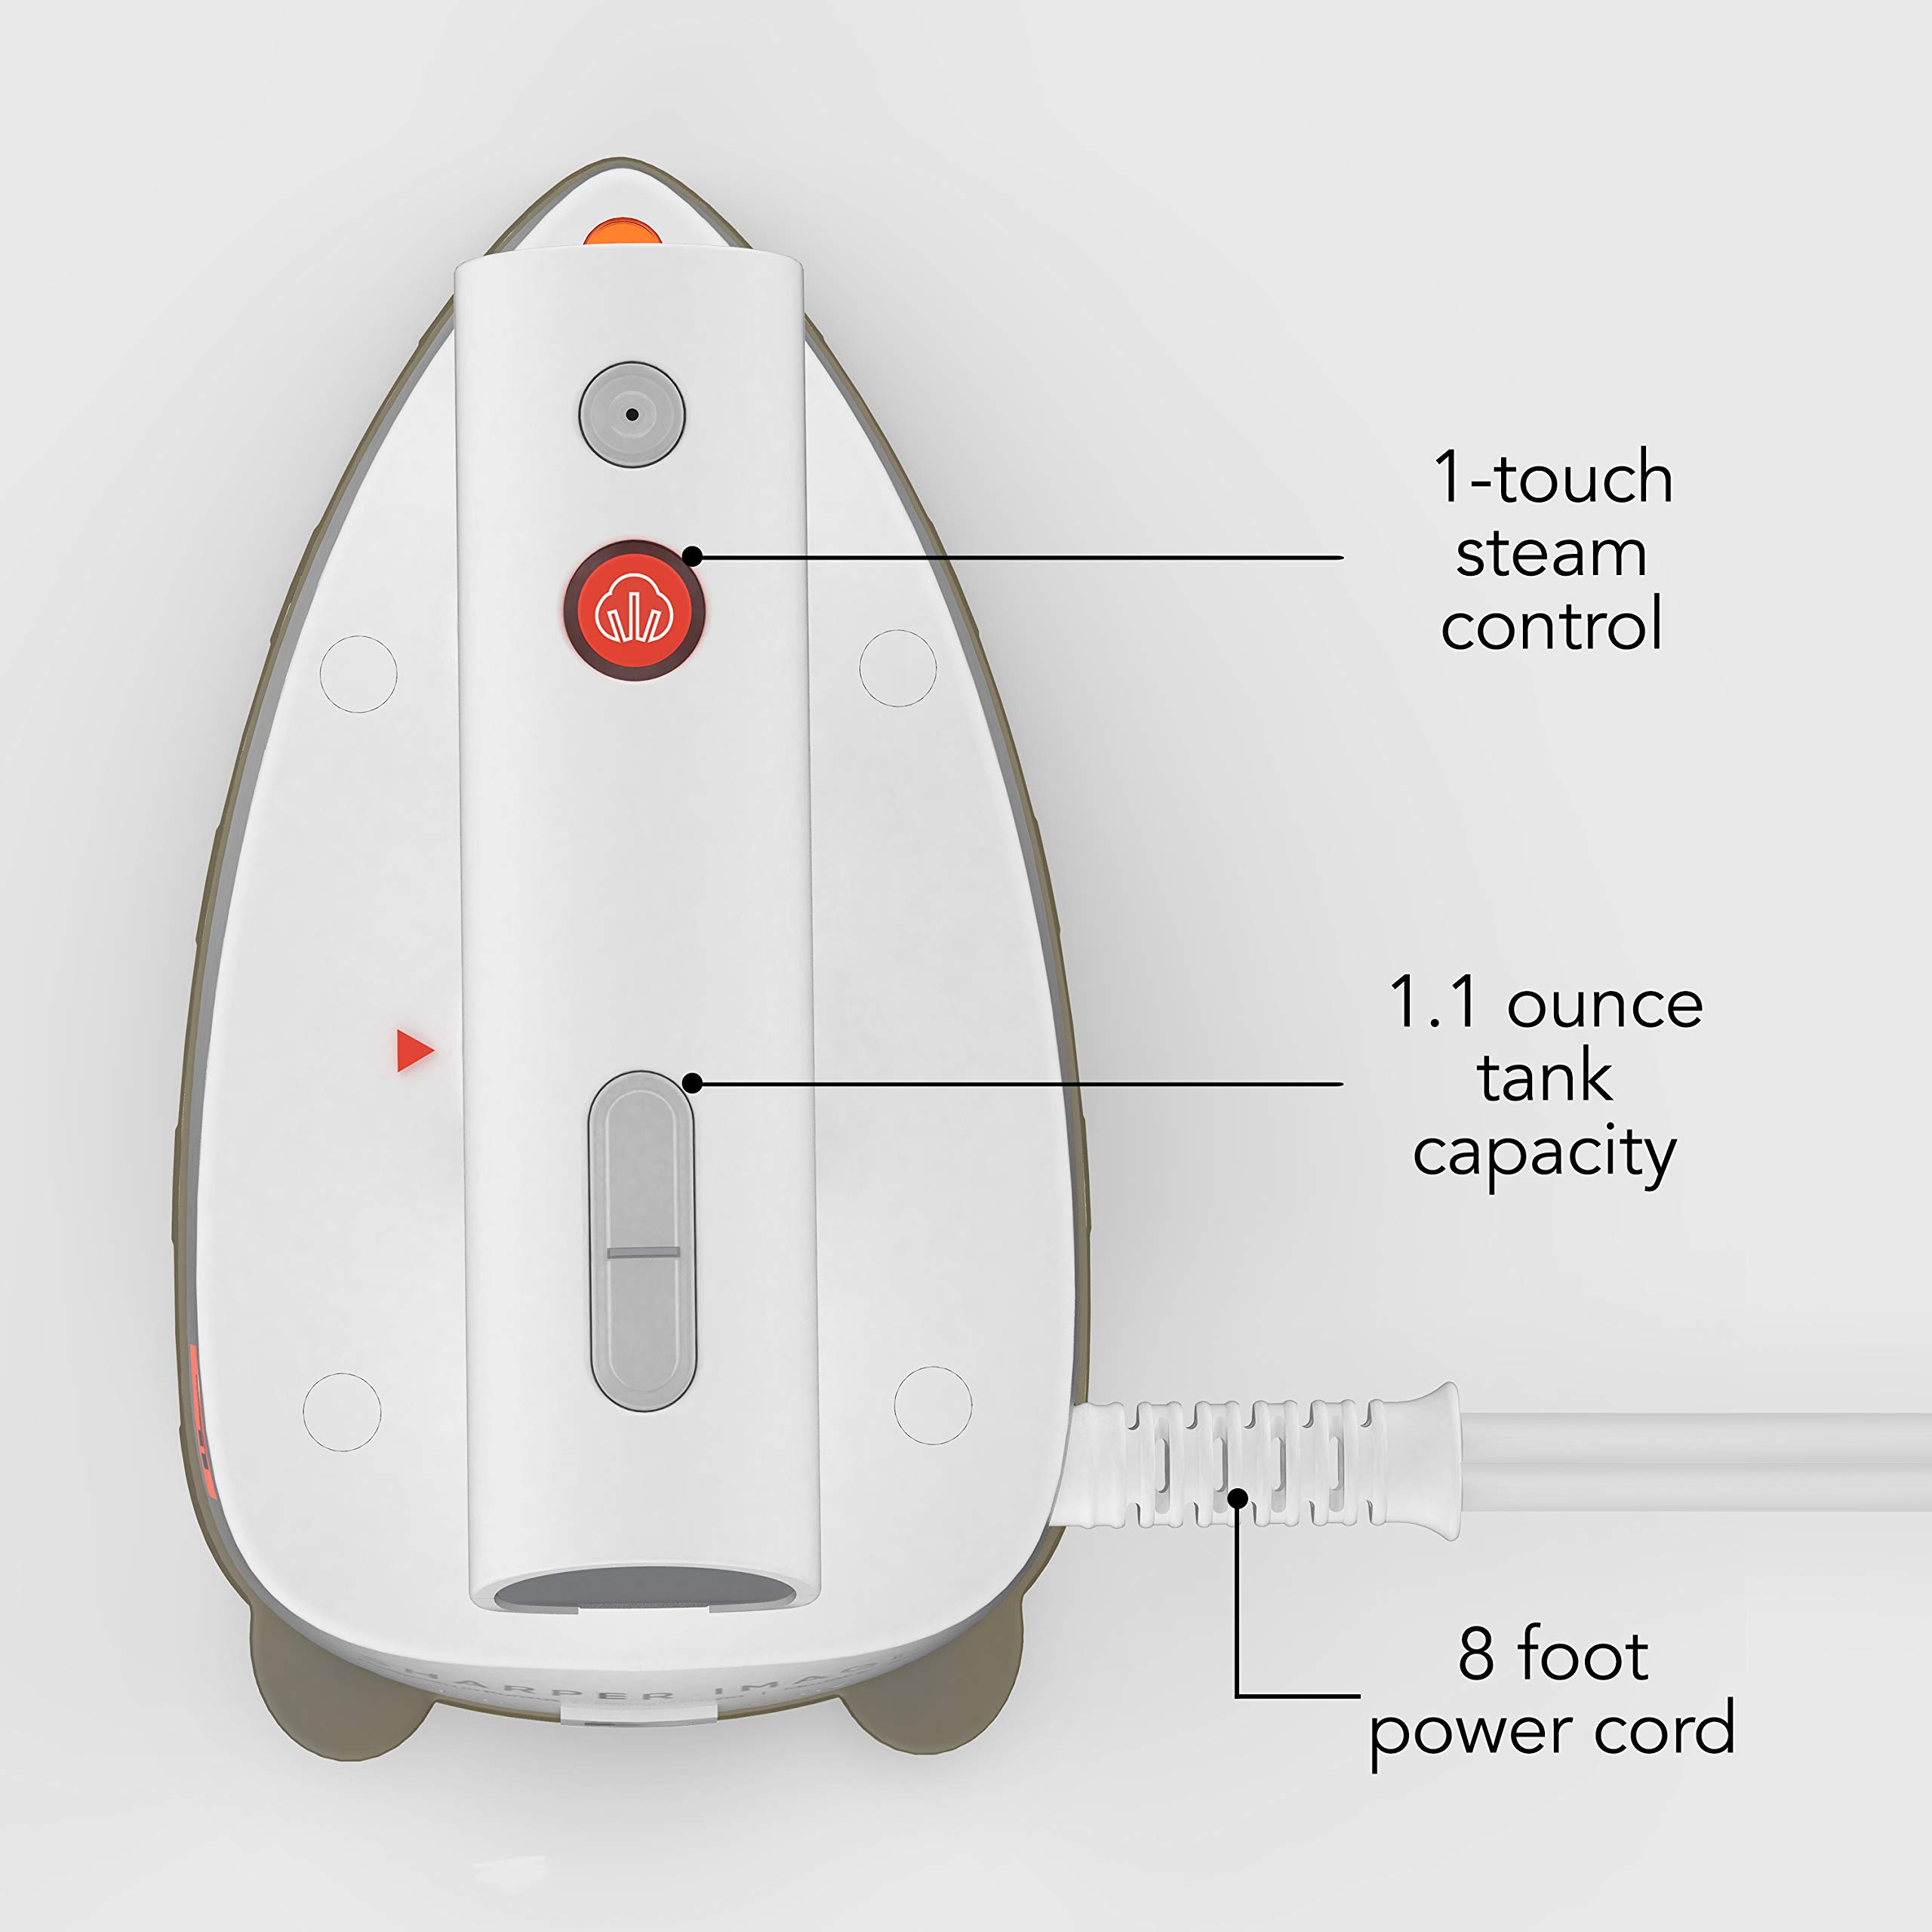 Sharper Image SI-755 Mini Steam Iron with Dual Voltage for Travel